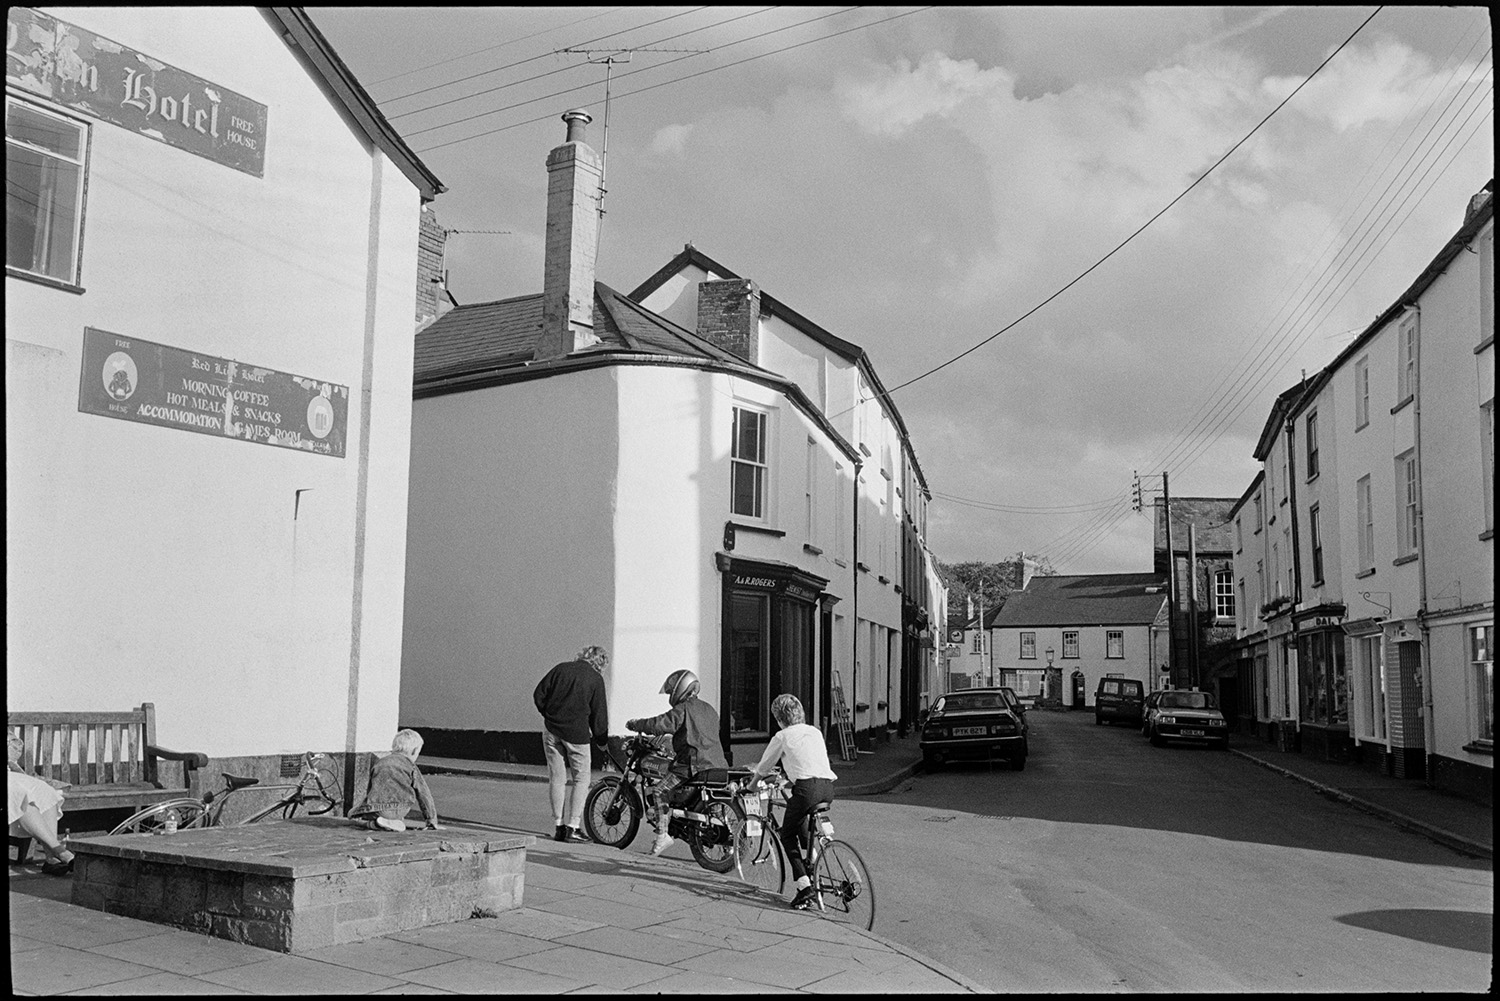 Street scenes with children practising throwing a baton.
[A street scene in Chulmleigh showing the Red Lion Hotel and A & R Rogers the chemists, with the main street, shops and town square in the background. Young people with a motorcycle and bicycles are passing by a wooden bench on the pavement in the foreground.]